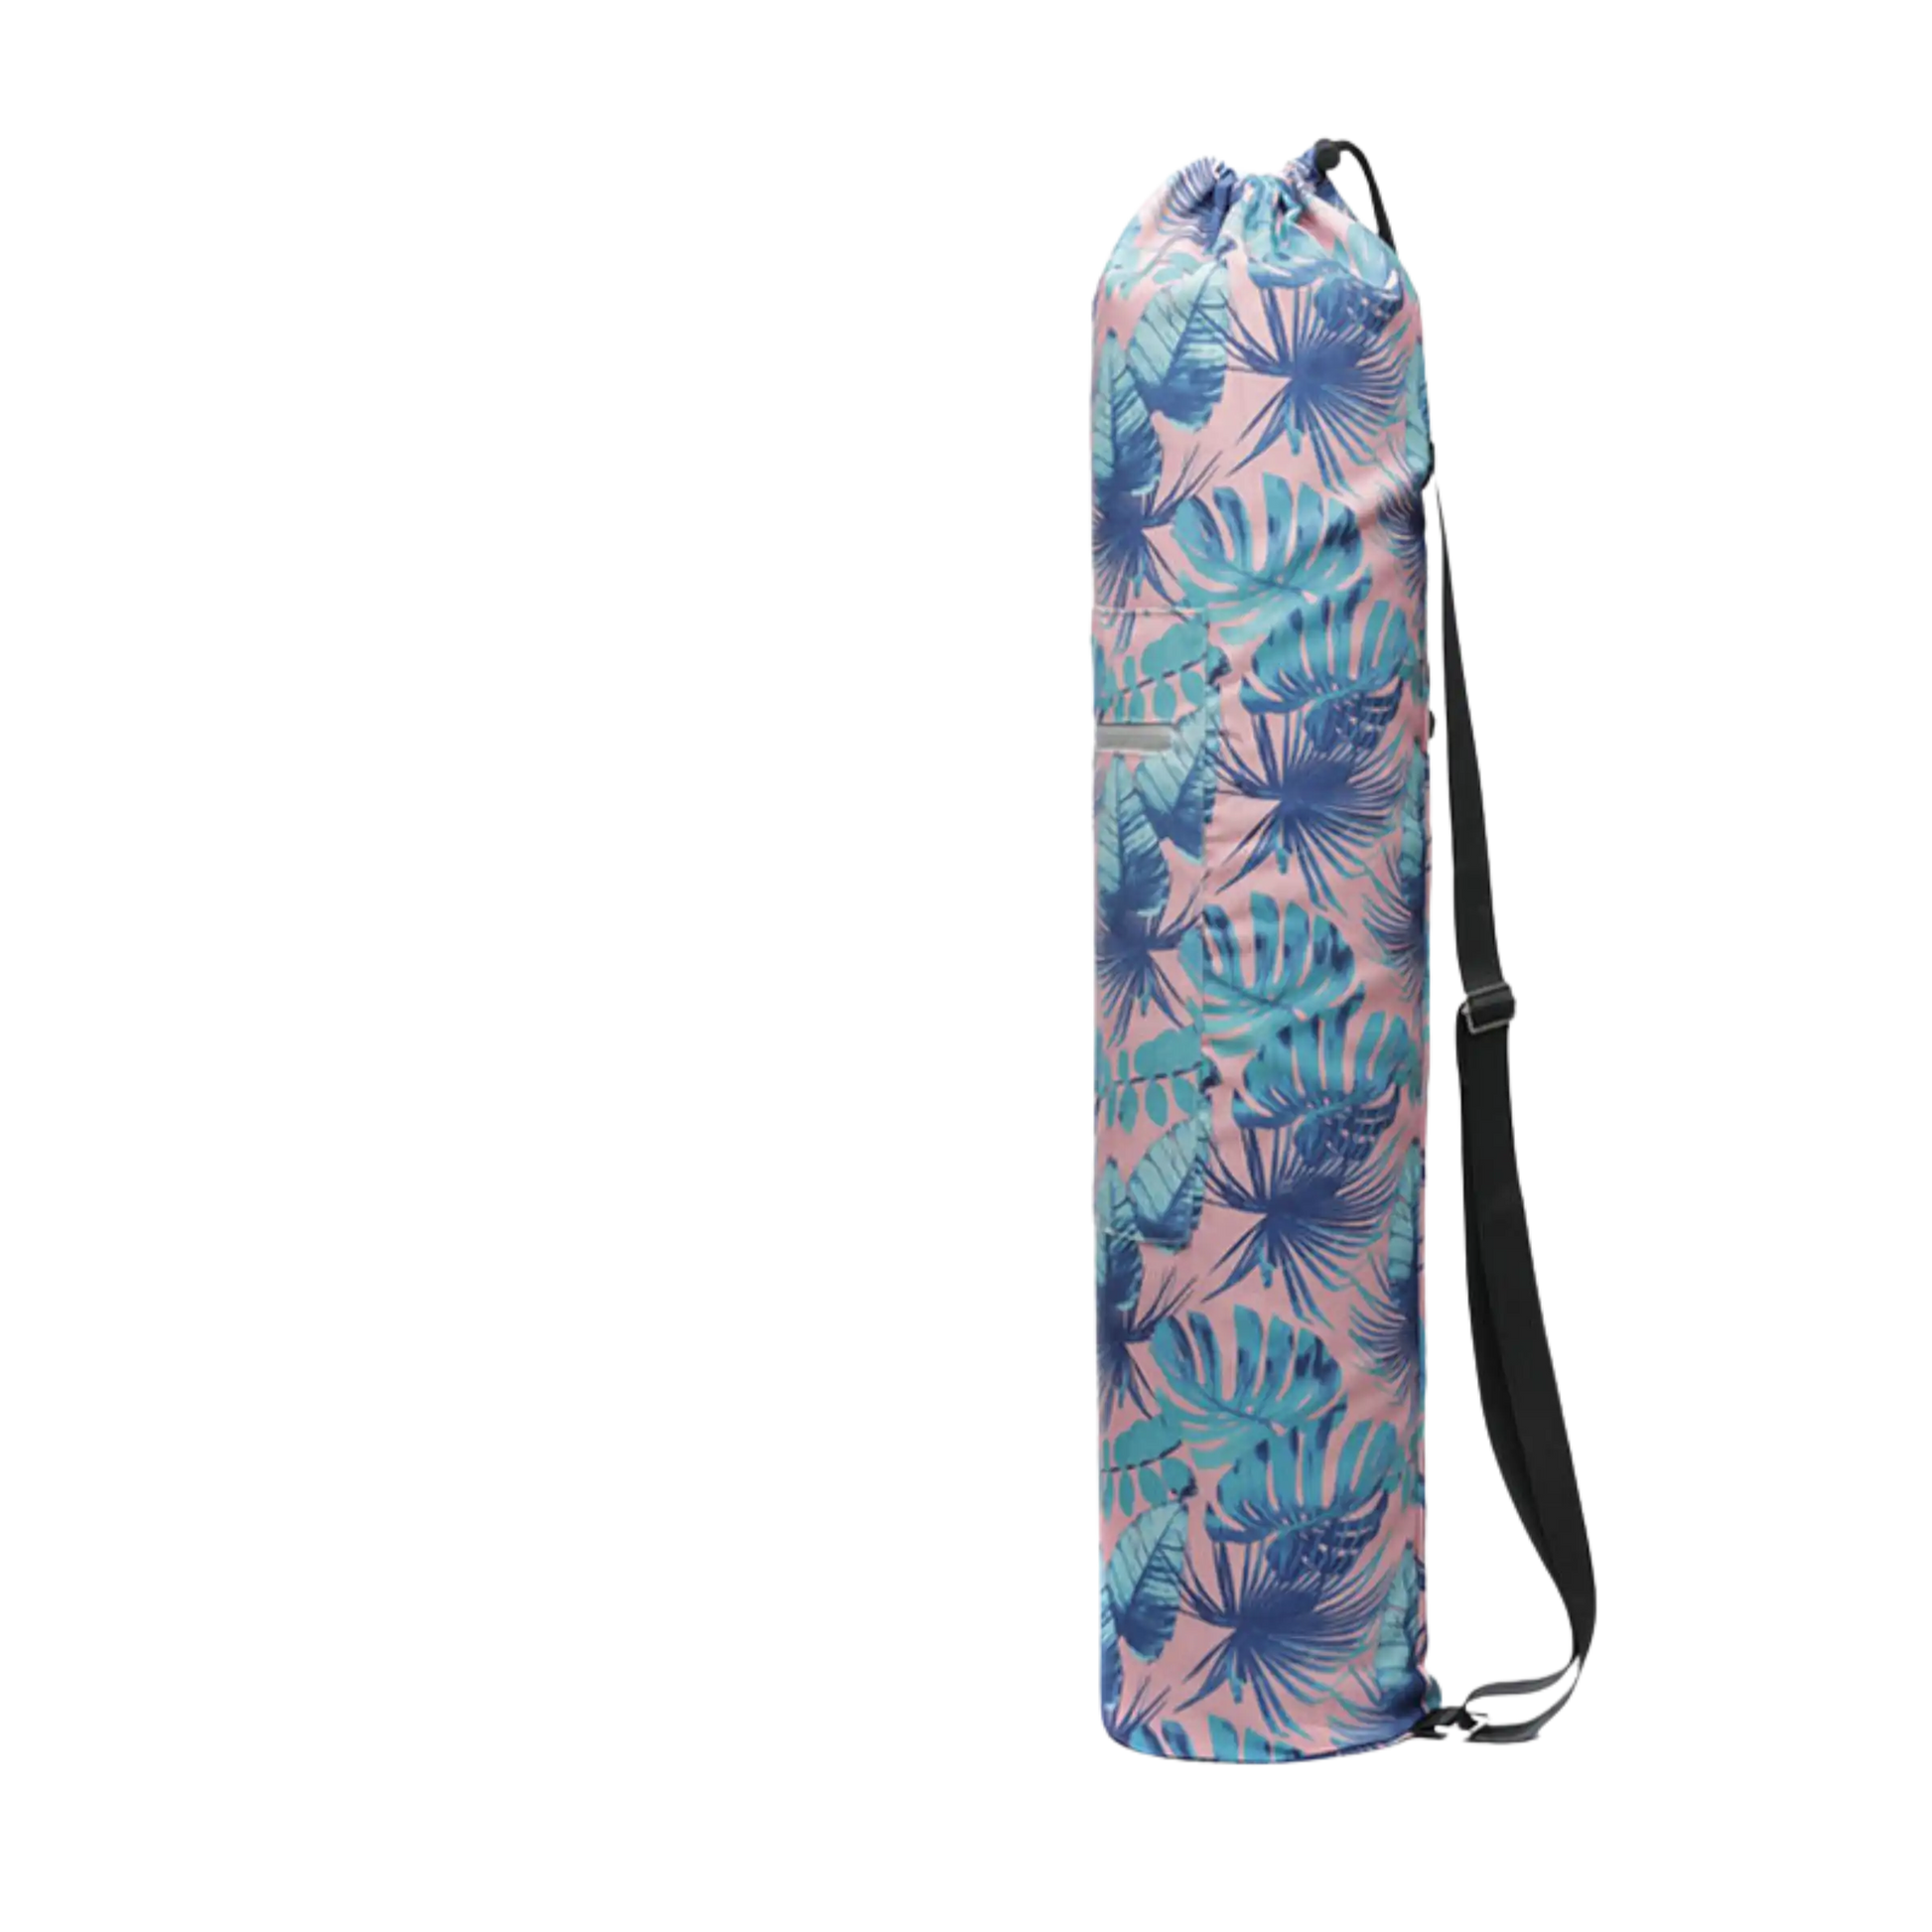 PREMIUM YOGA MAT BAG WITH 6MM PROTECTION - Height 75cm;